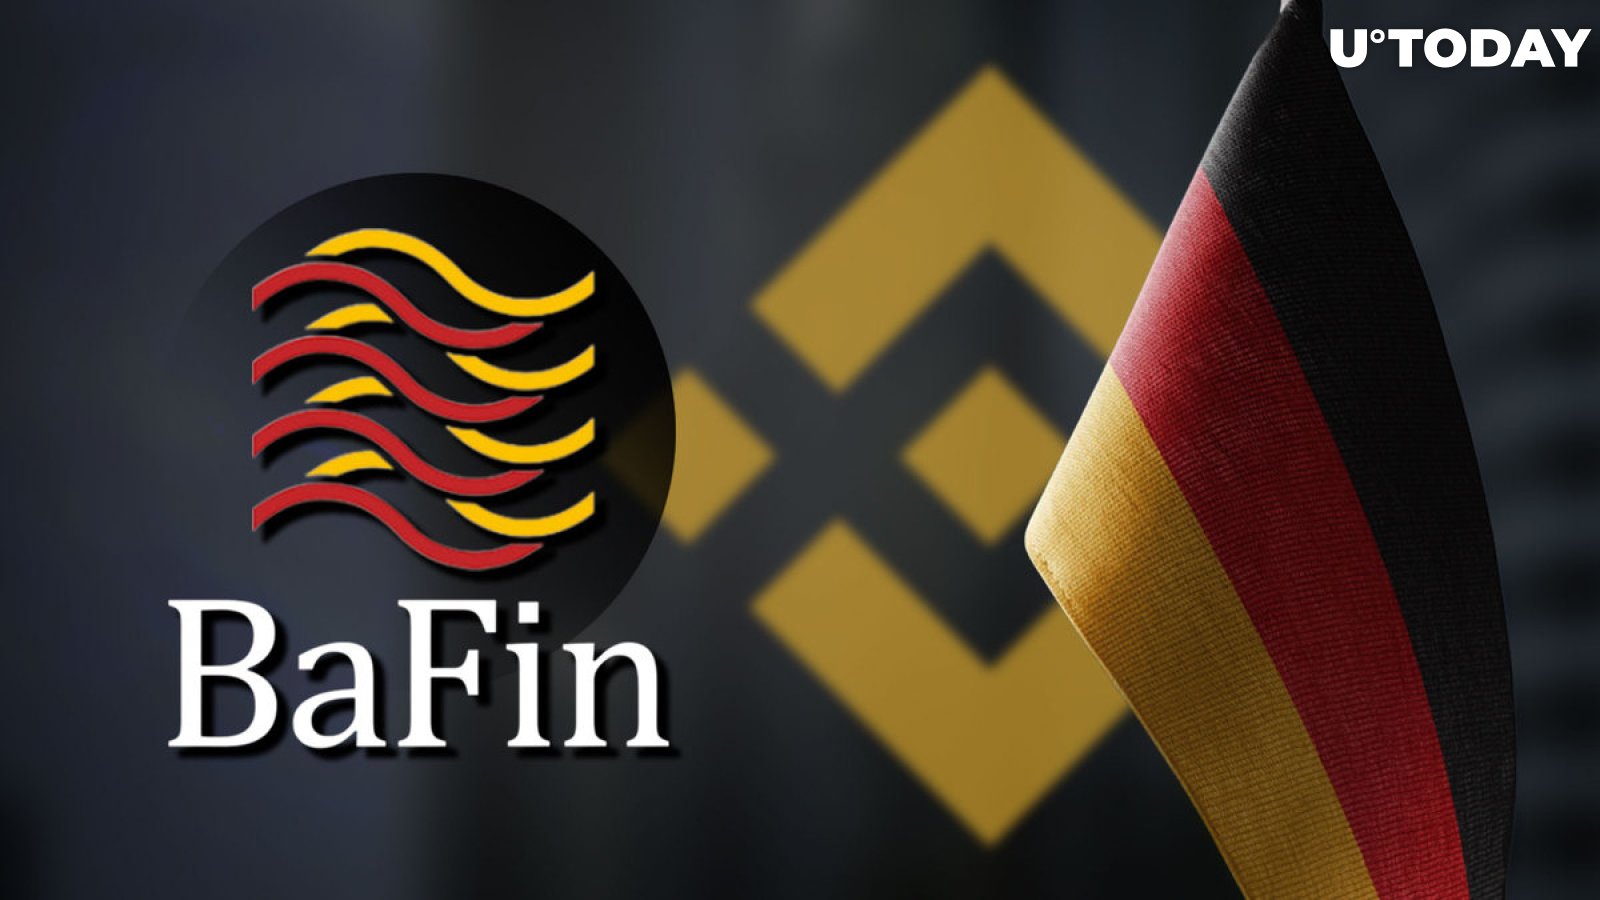 Binance License Application in Germany Rejected by BaFin: Report